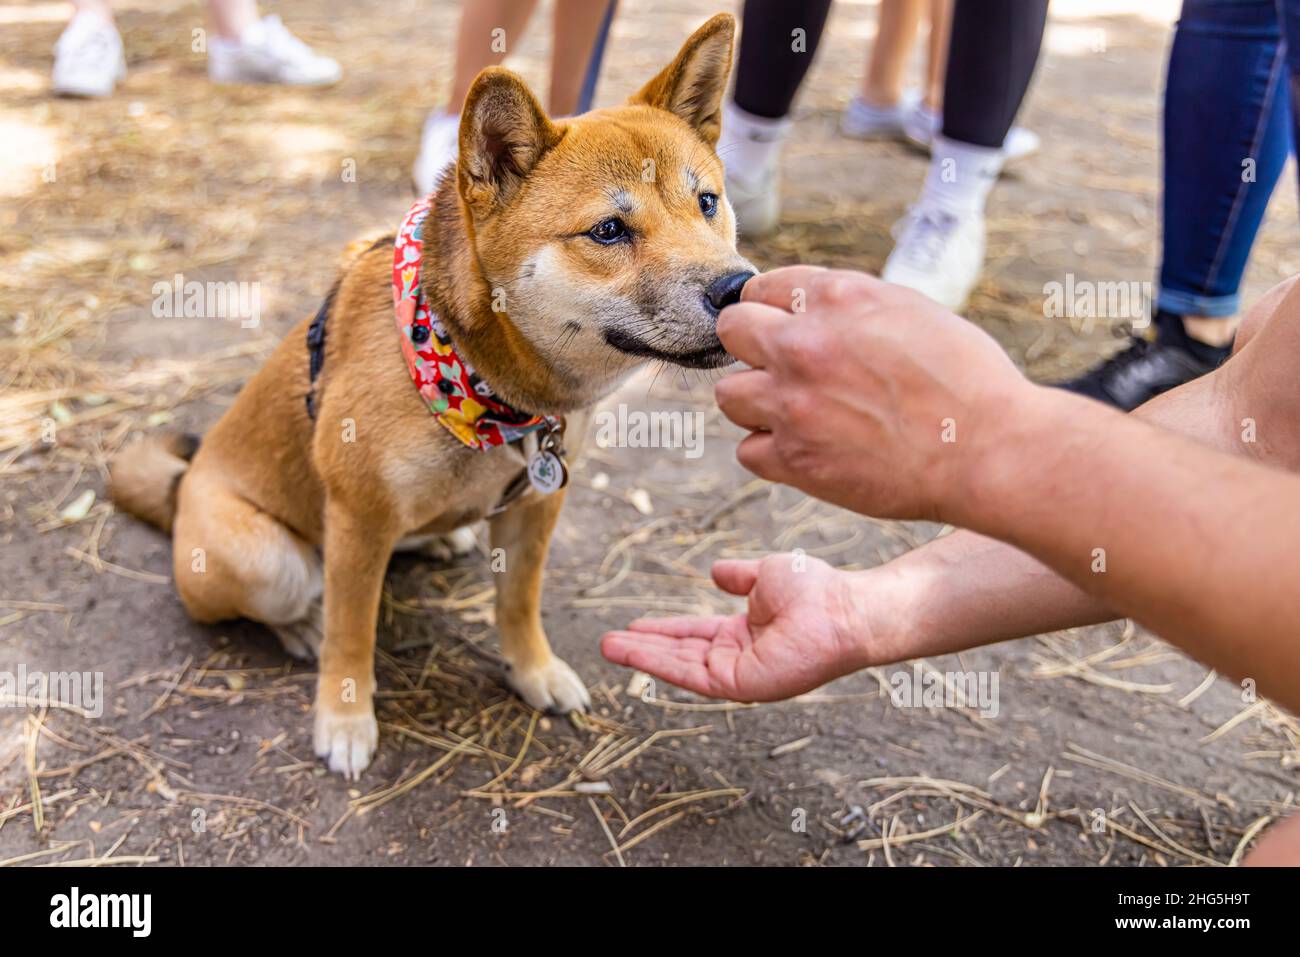 Closeup view on the hands of a person training a red Shiba Inu puppy with a treat reward, reaching out and asking for a paw. With blurry background. Stock Photo